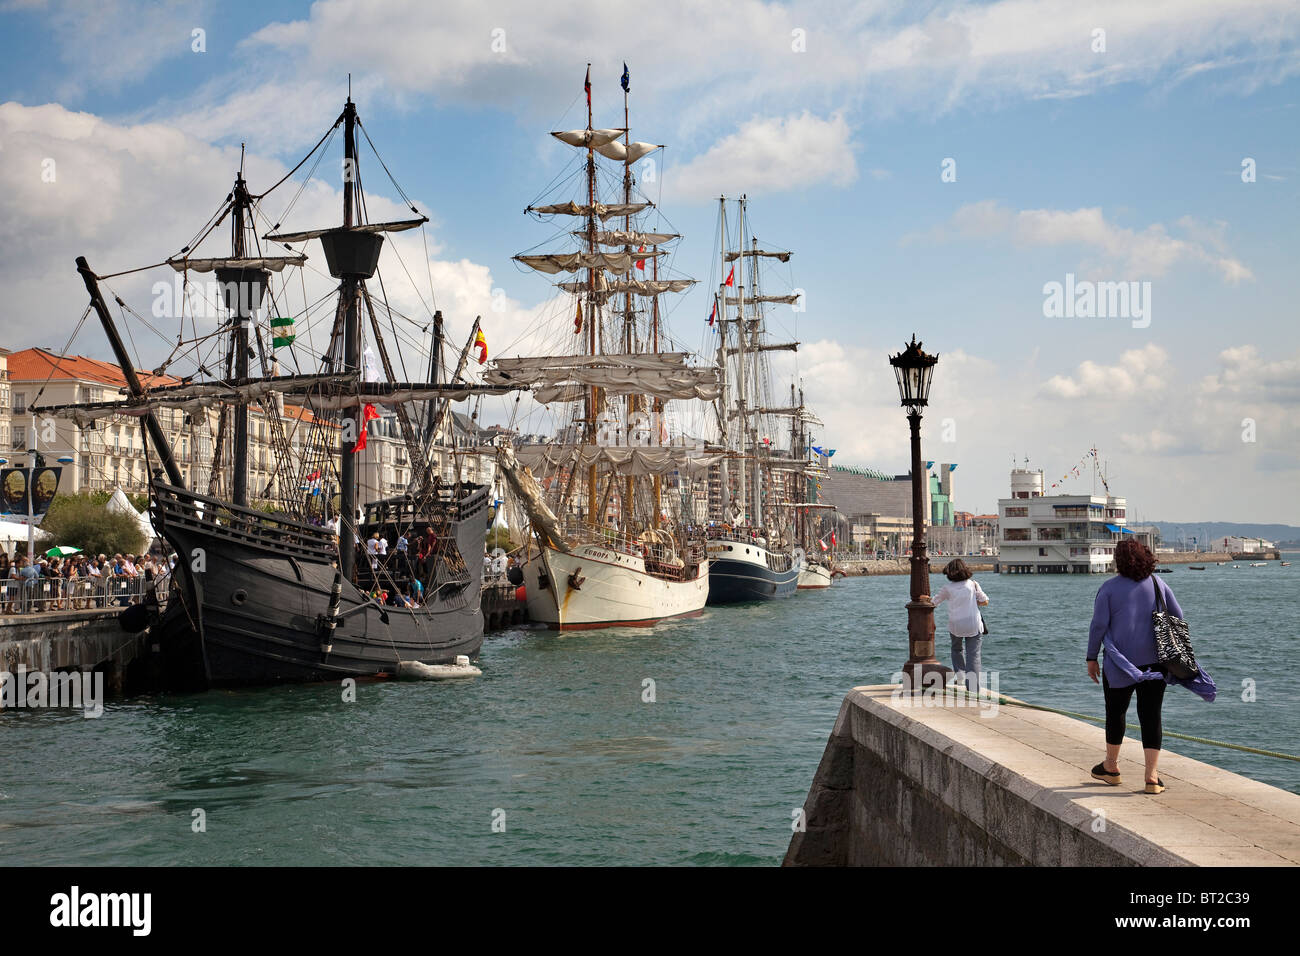 Concentration of sailboats in the Festival del Mar Santander Cantabria Spain Stock Photo